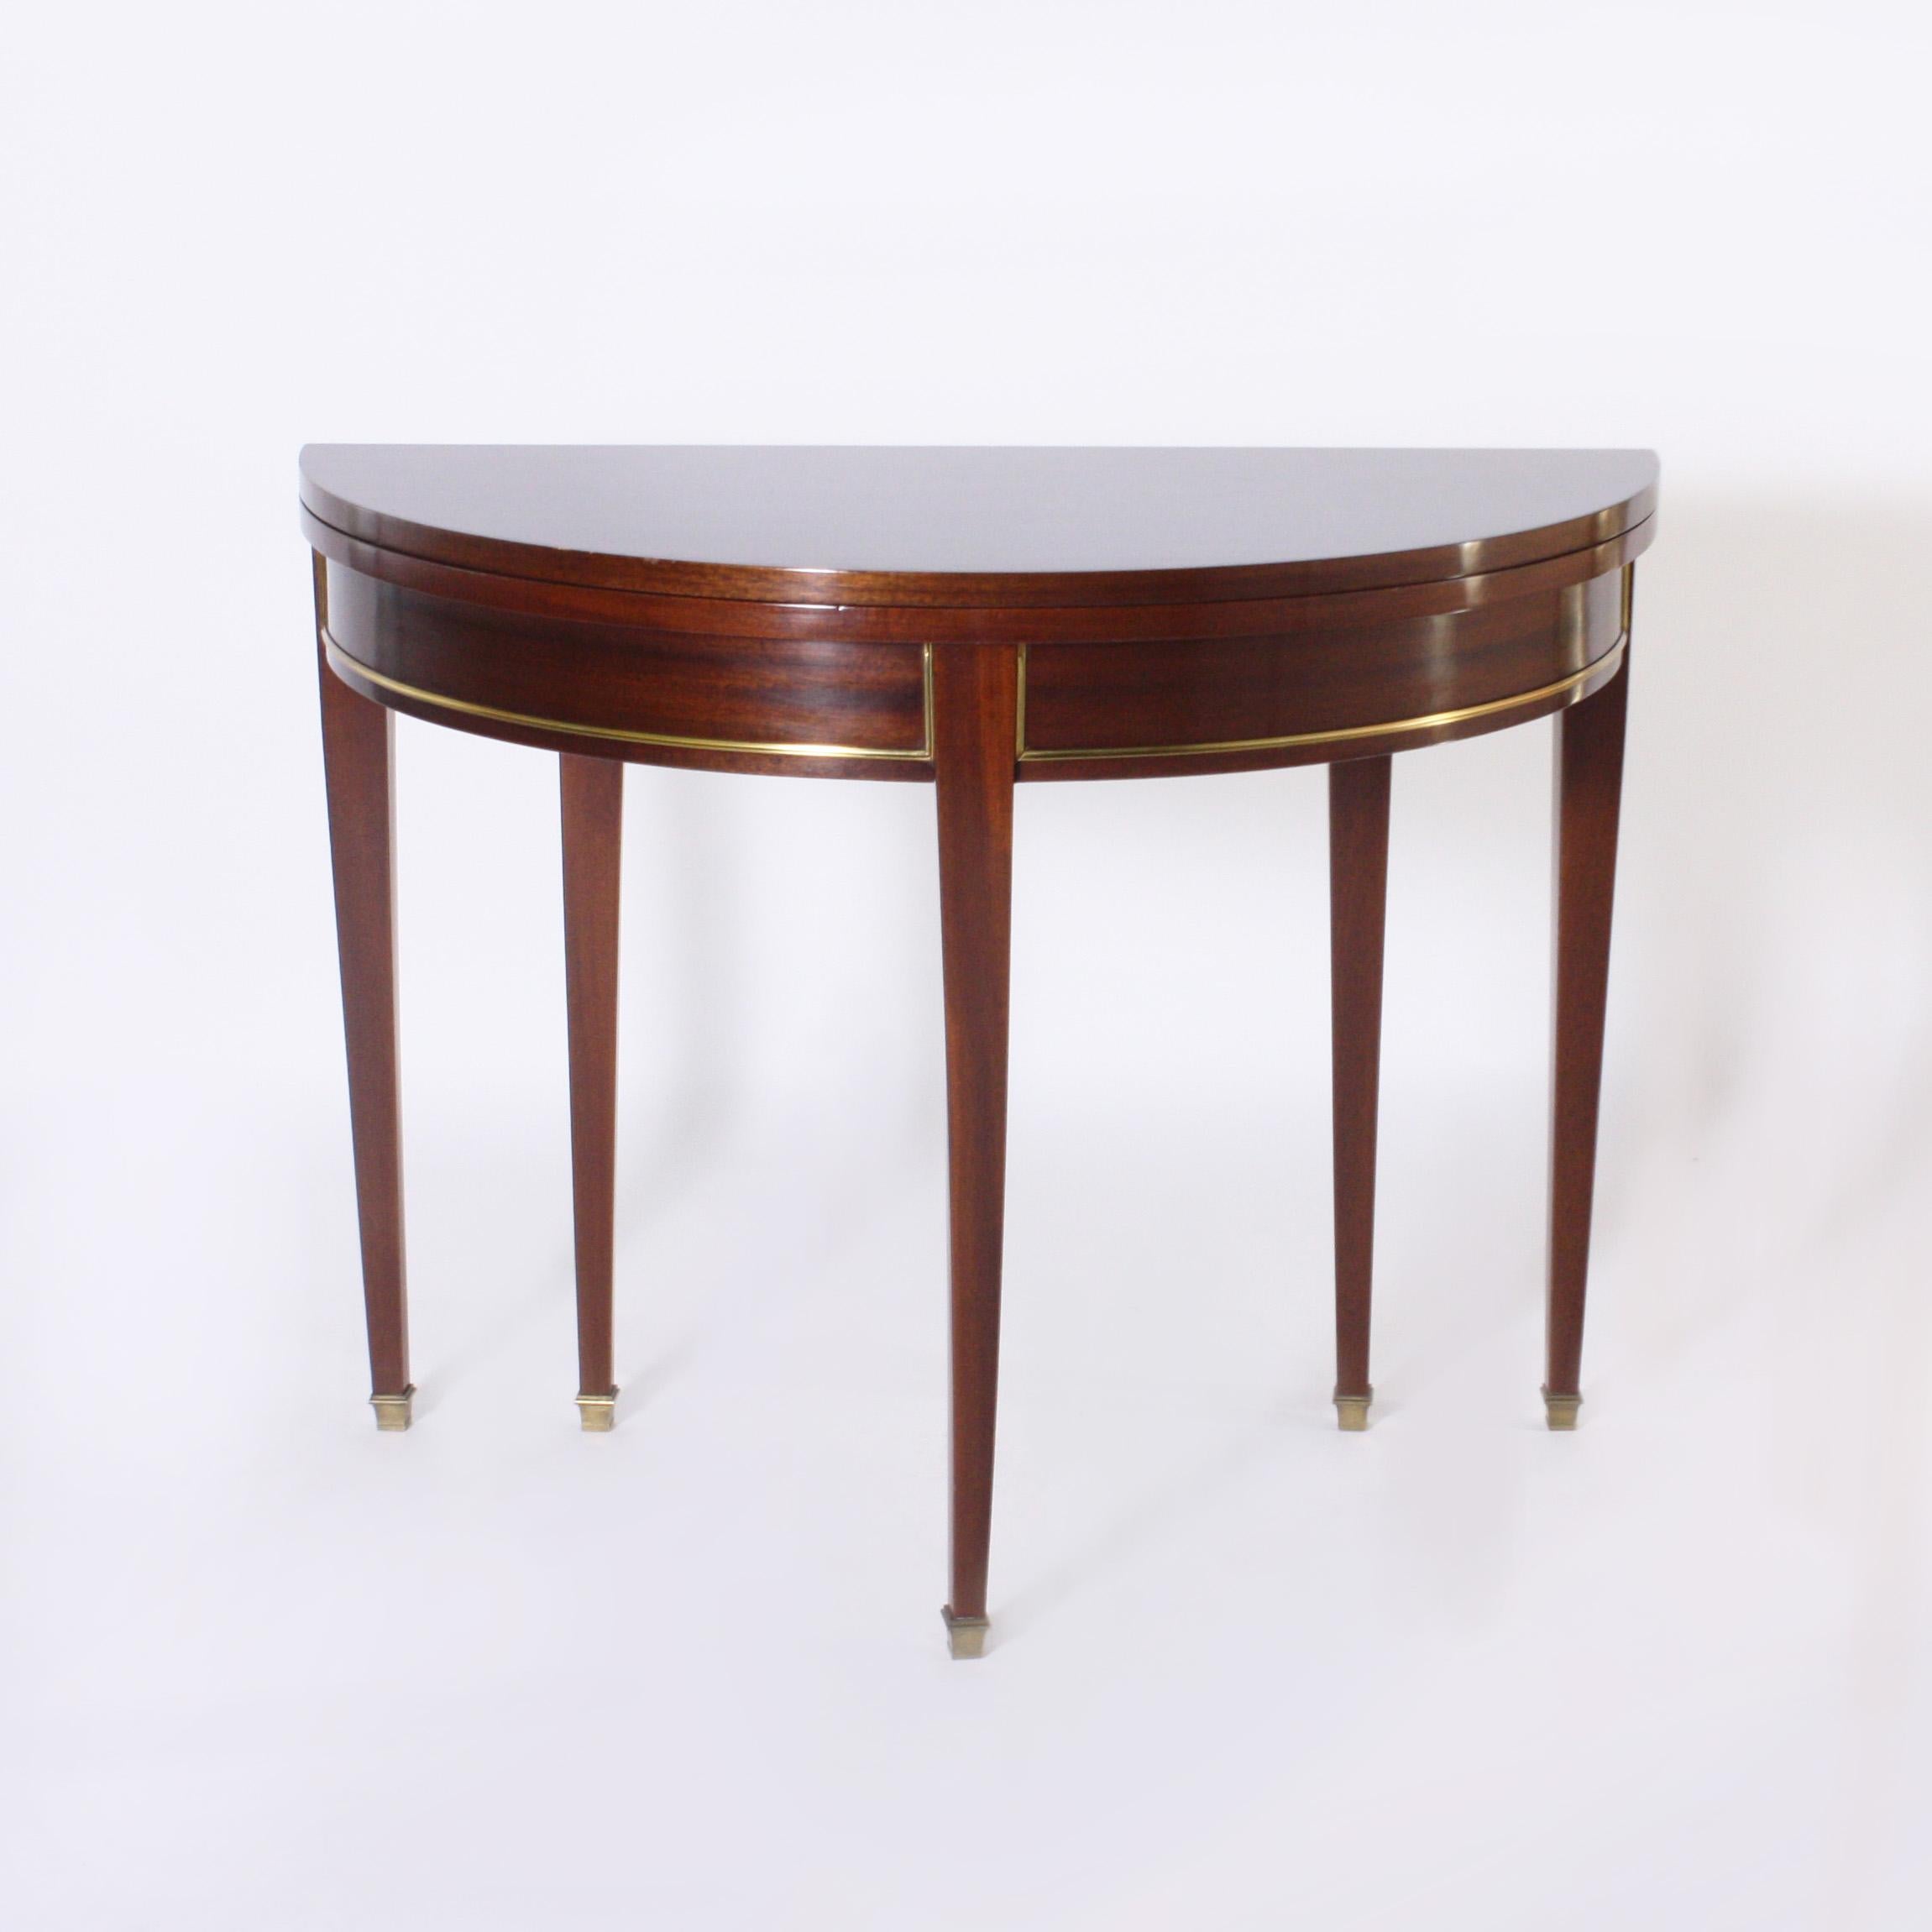 French Directoire-Style Walnut Demilune with Brass Detail, circa 1940